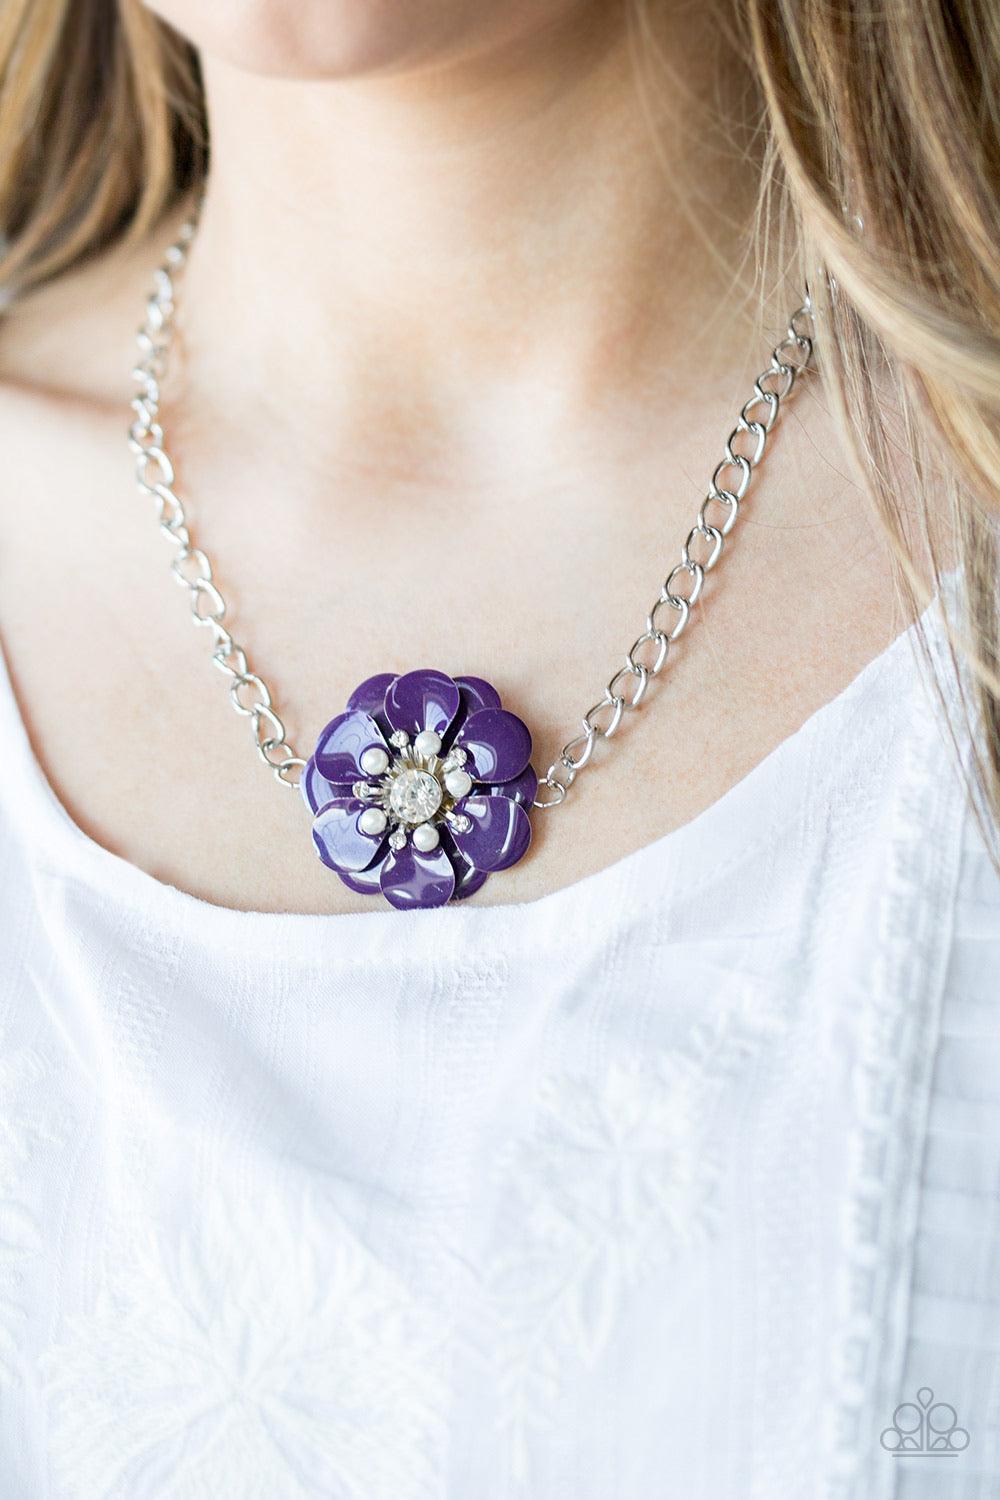 Paparazzi Accessories Hibiscus Hula - Purple Painted in a shiny purple finish, overlapping petals bloom below the collar. Dainty white pearls and glittery white rhinestones are encrusted around the center of the floral pendant for a whimsical finish. Feat